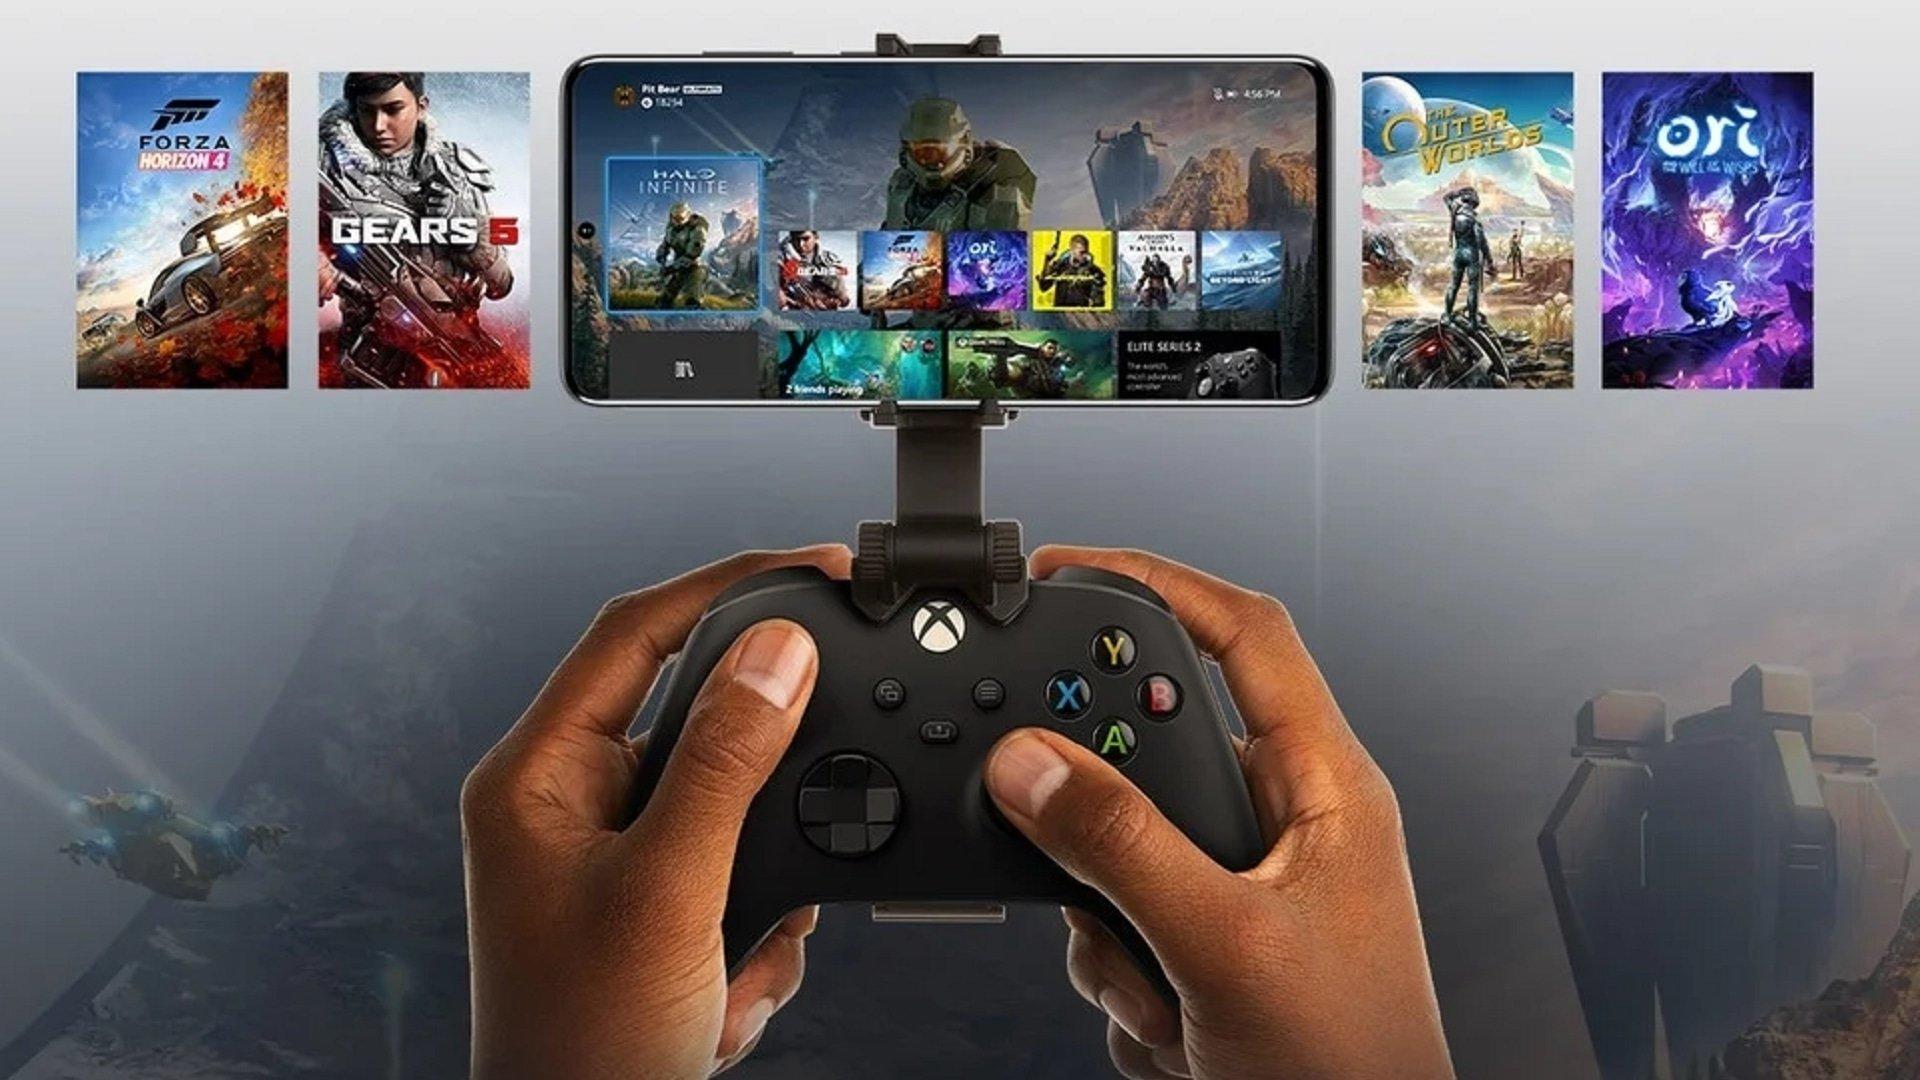 Phil Spencer details Microsoft's plan to open an Xbox Mobile App